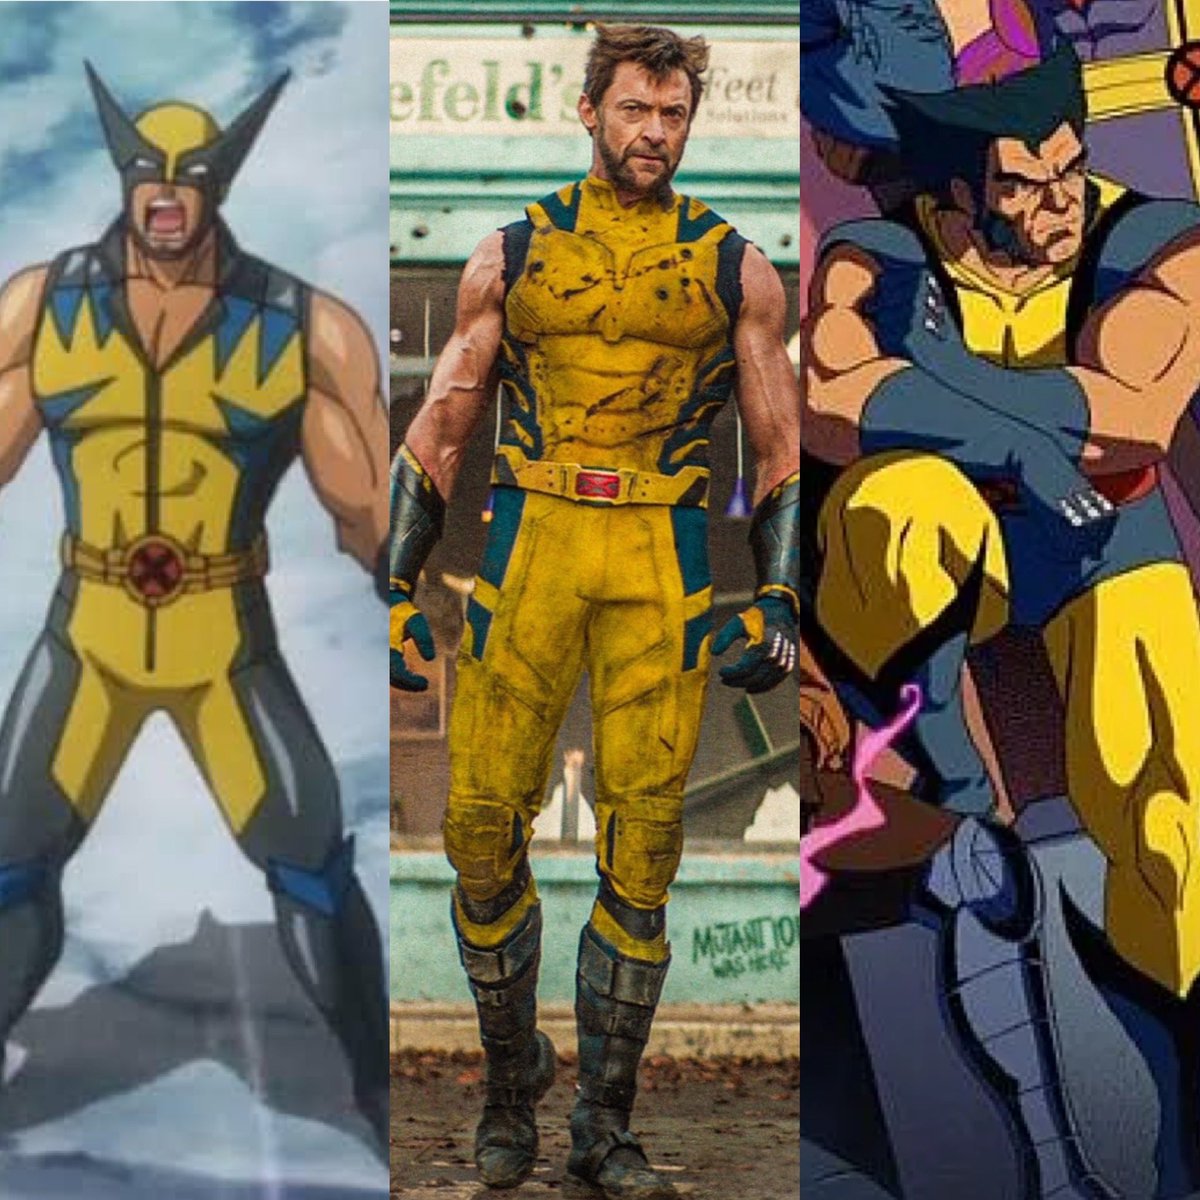 “Sleeve” it alone Wolvie… #LFG #WolverstevesCountdown continues at 576 days counting & posting to #Deadpool & #Wolverine 92 DAYS TO GO! #LFG on a multiversal road trip with #DeadpoolAndWolverine #DiskWars #WolverineAndAsshole #Xmen97 We live in great times!